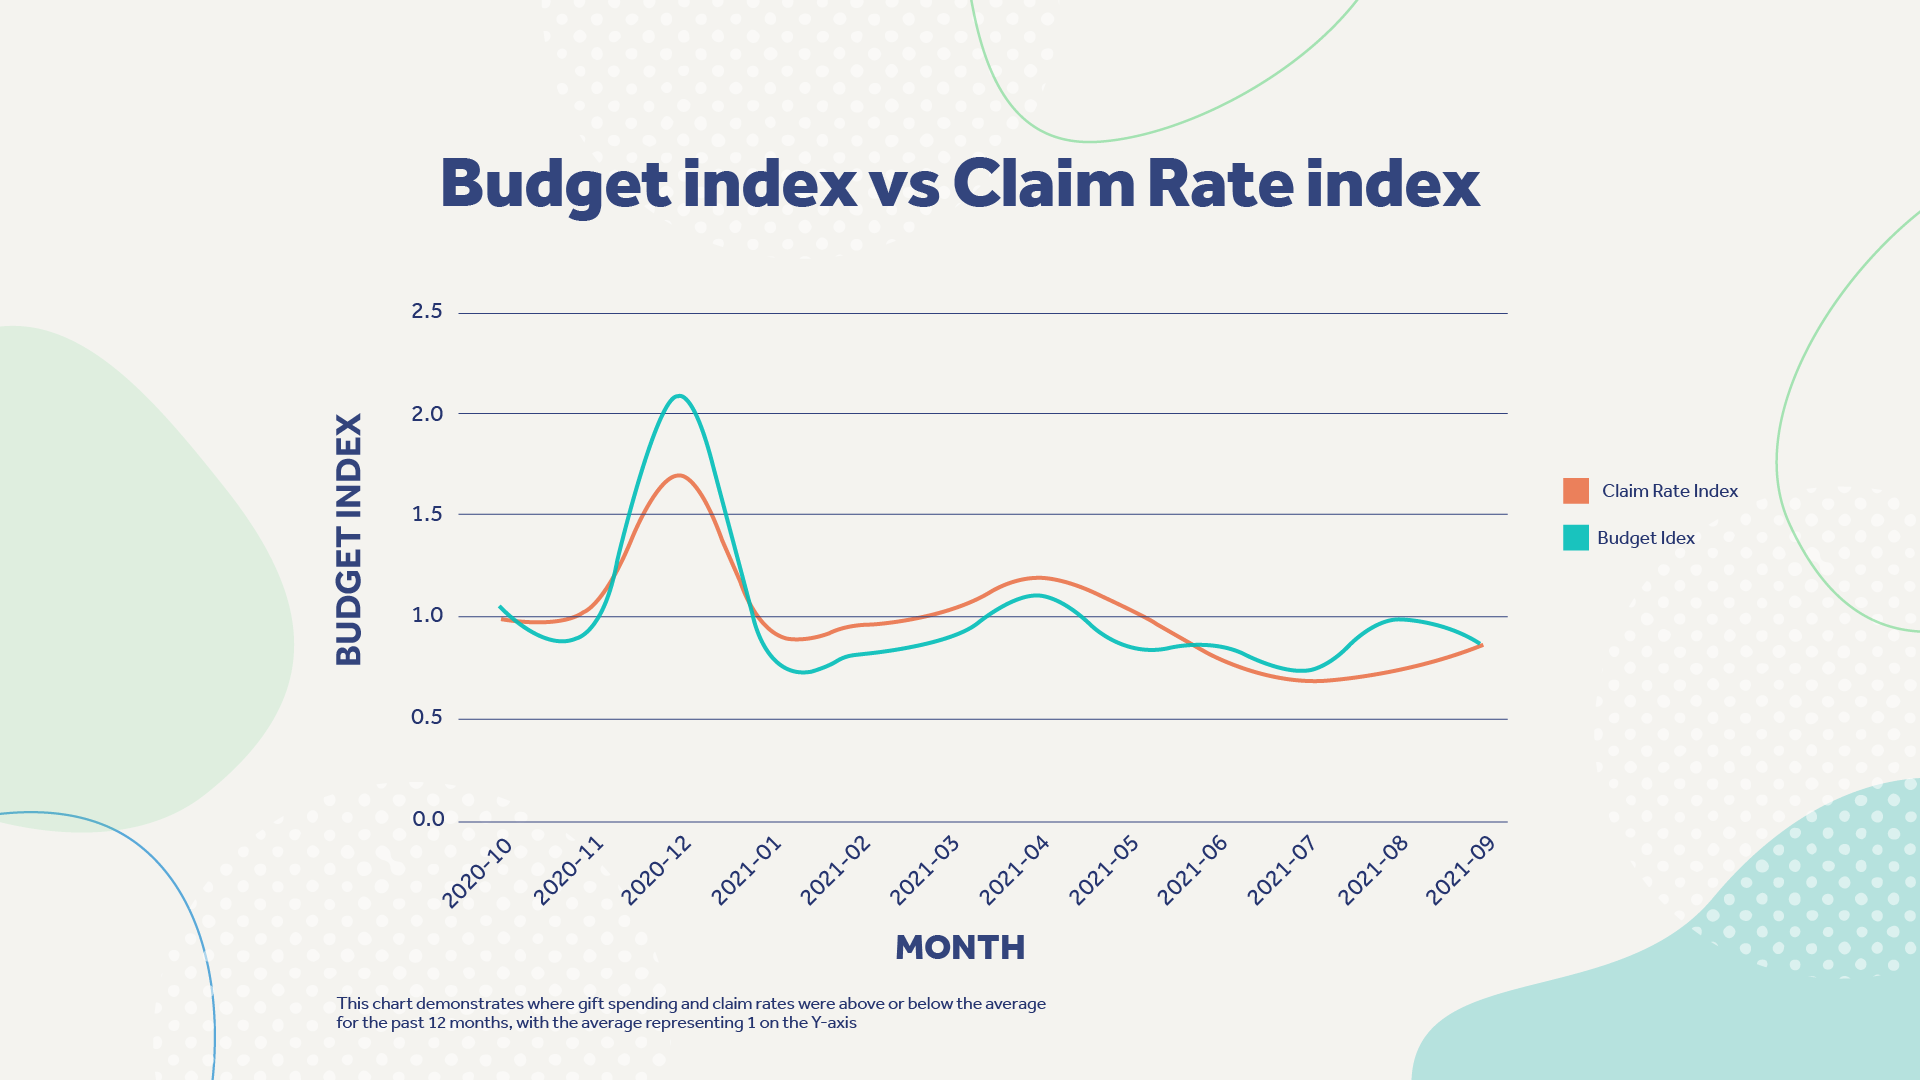 Chart showing budget index versus claim rate index